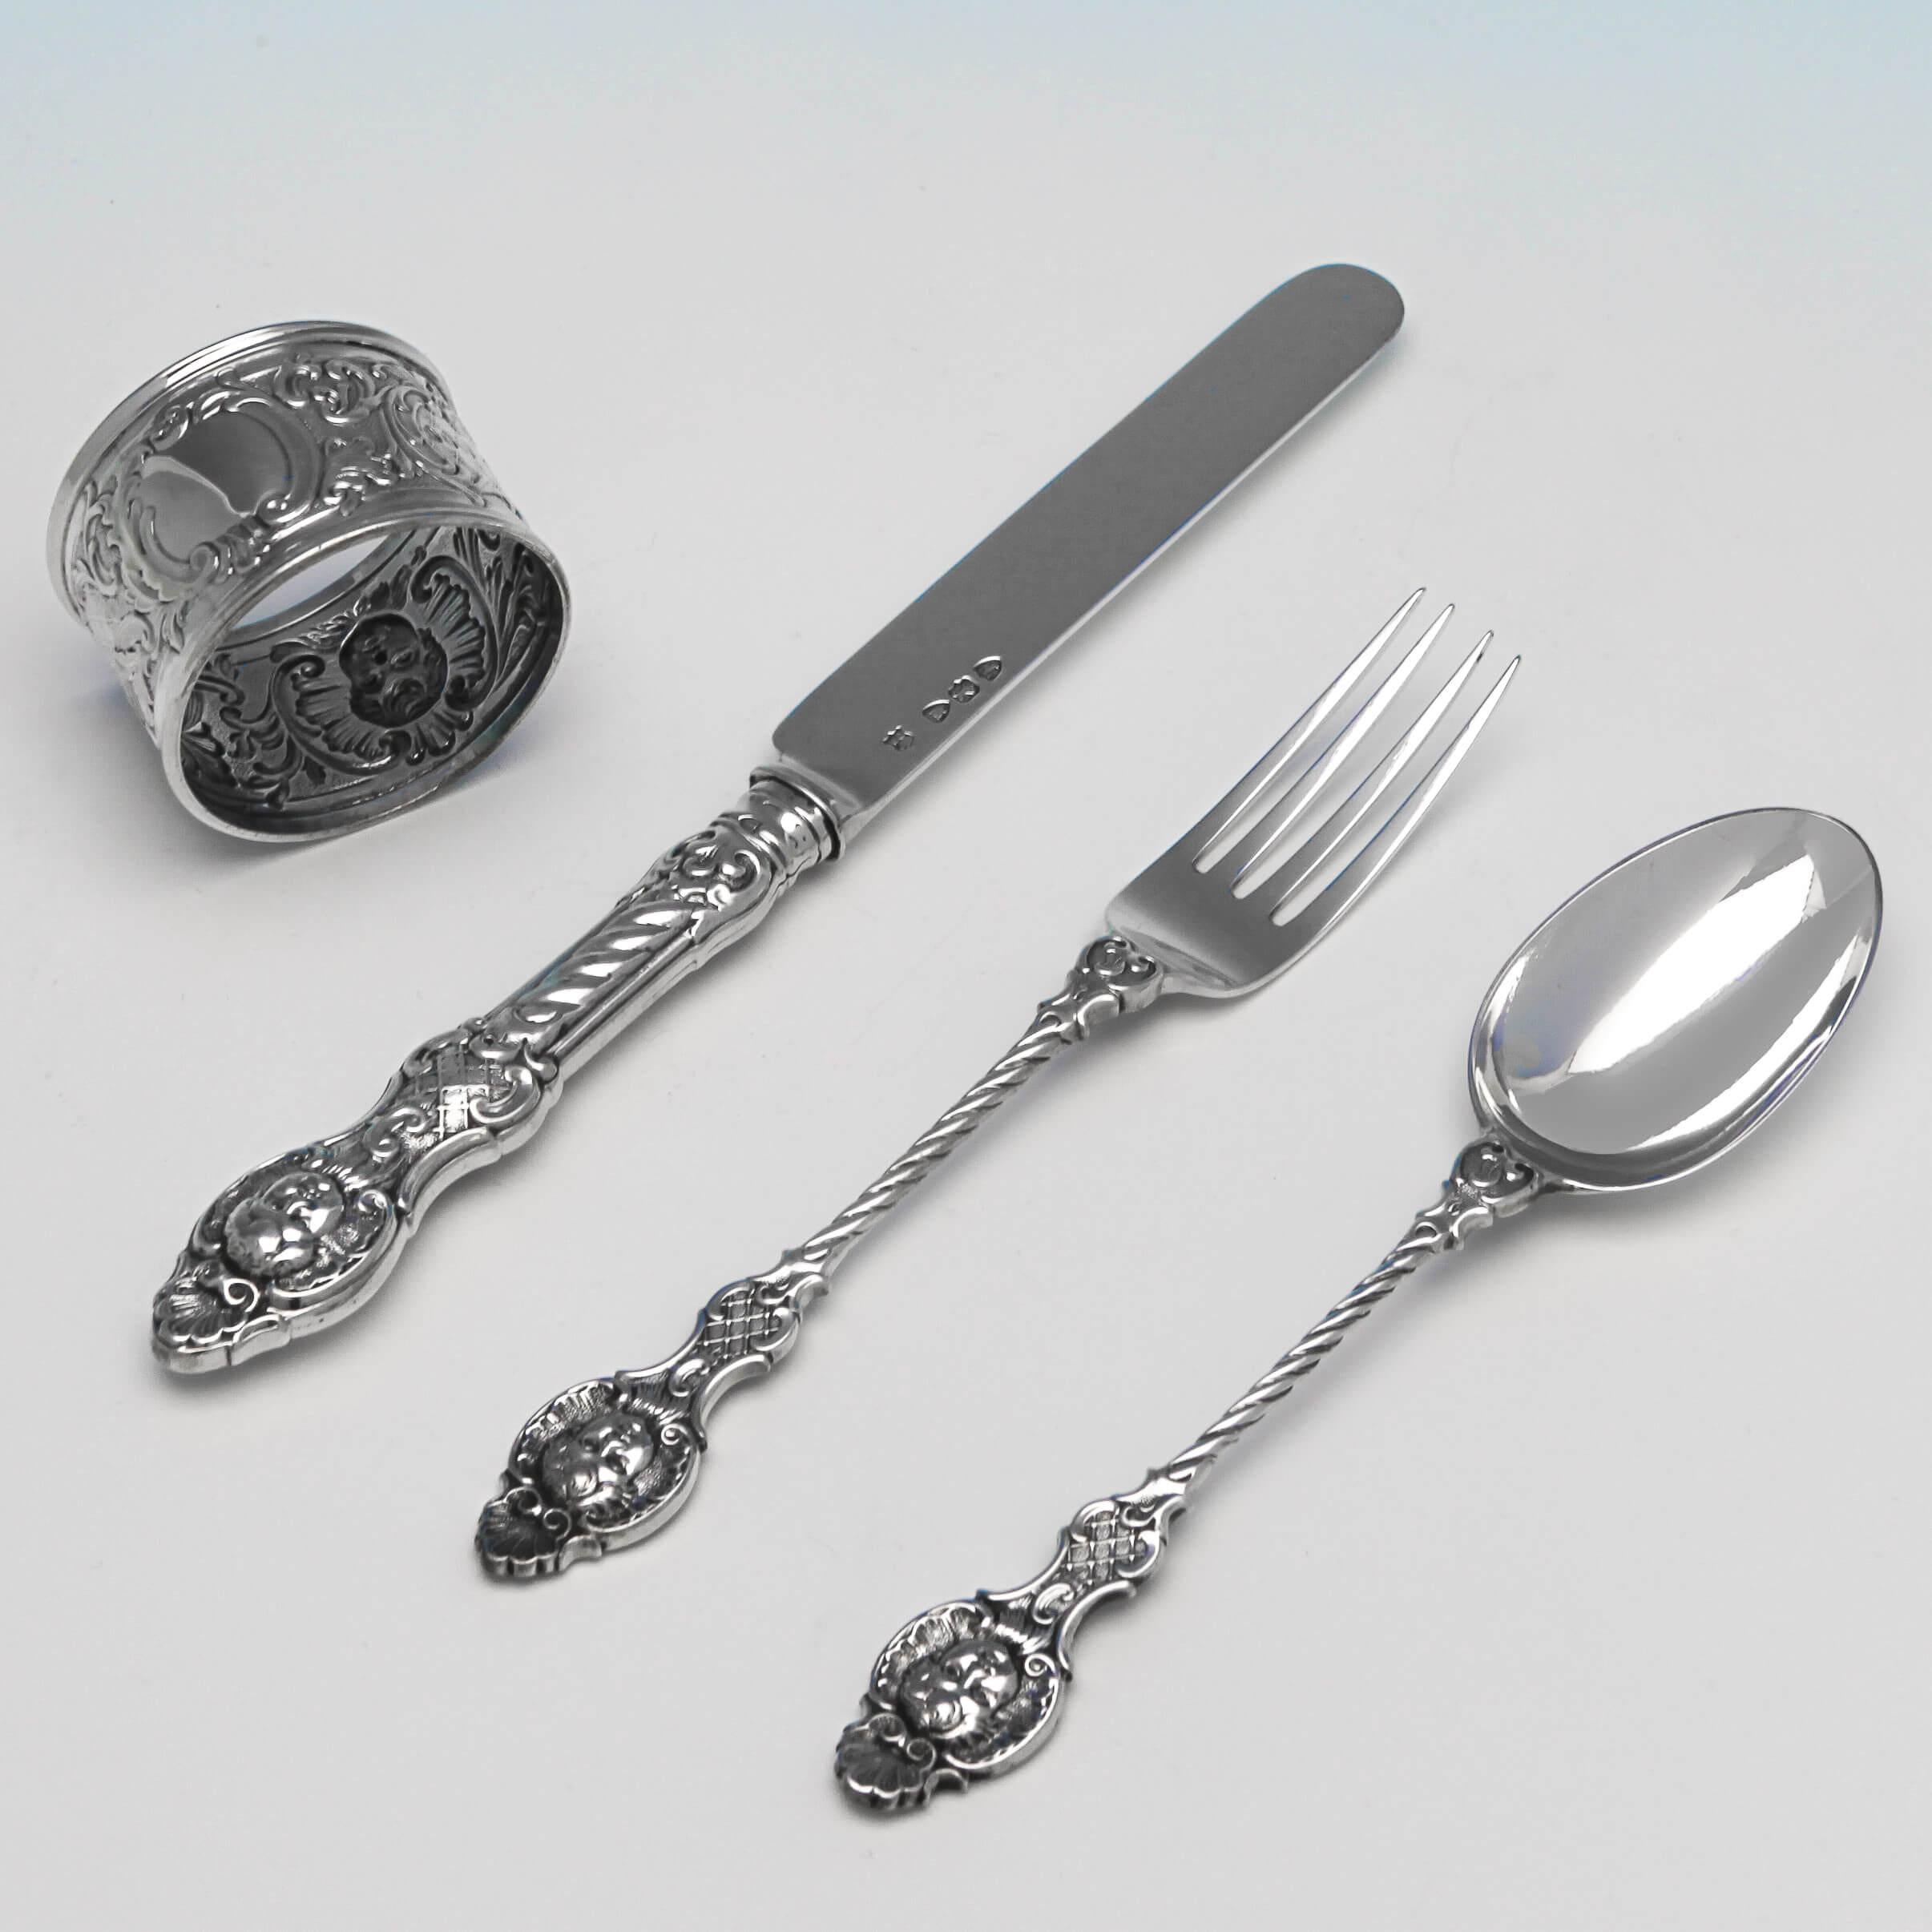 Hallmarked in London in 1894 by Gibson & Langman, this eye-catching, Antique, Victorian, Sterling Silver Child's Set is presented in its original fitted box. The flatware has highly decorative handles with shell topped cherubic masks. The knife and